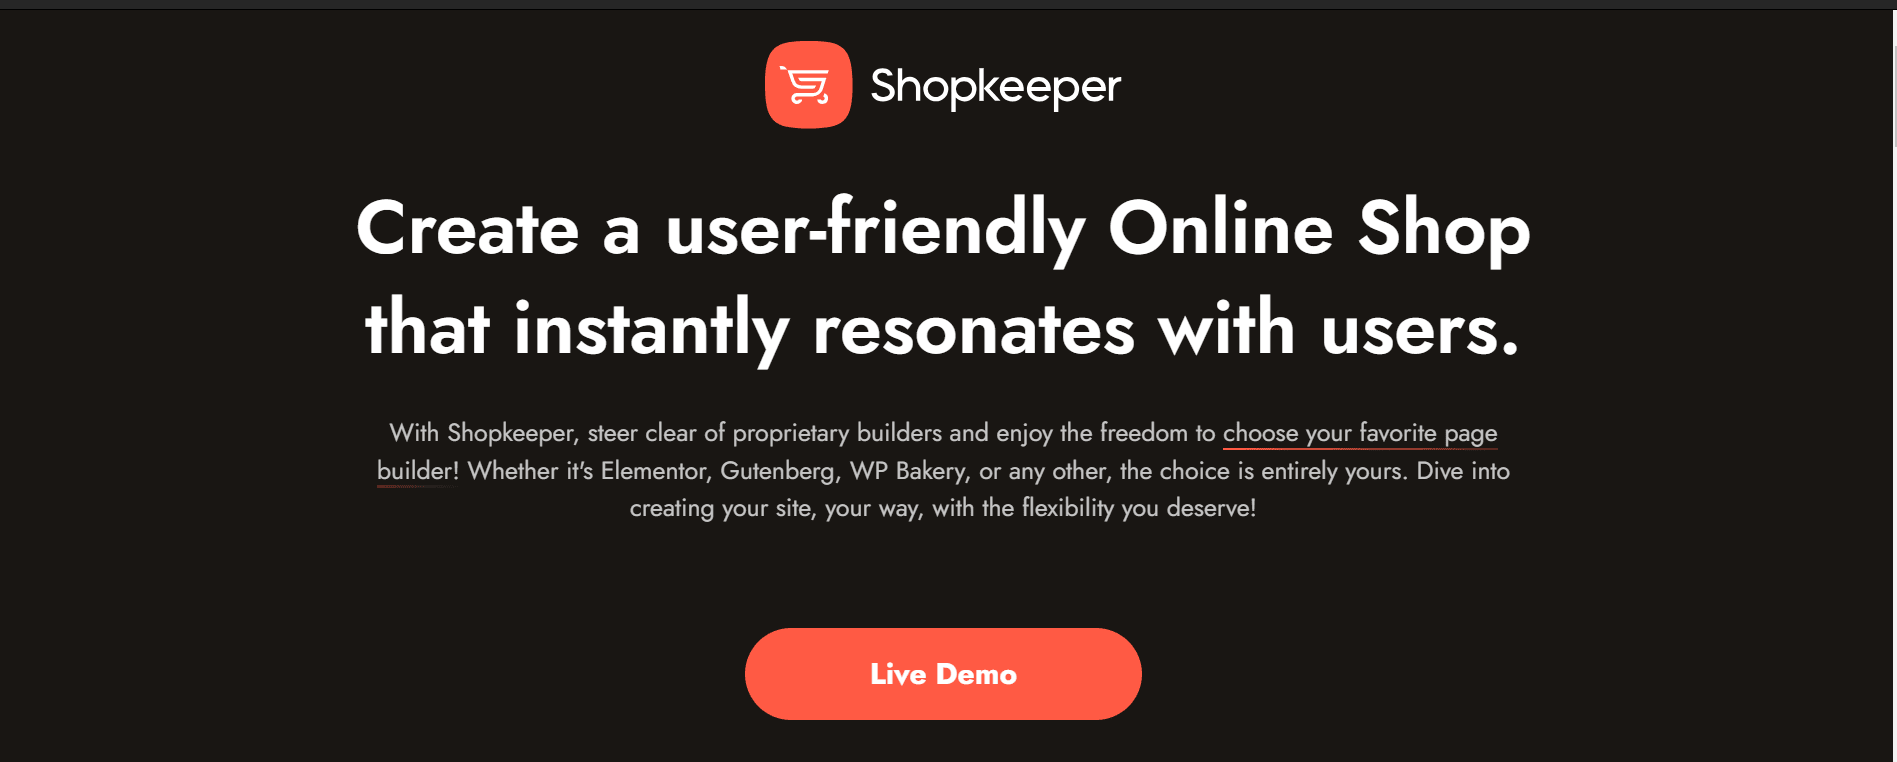 Black background on Shopkeeper's homepage with bold white text promoting a user-friendly online shop builder and an orange call-to-action button for a live demo.